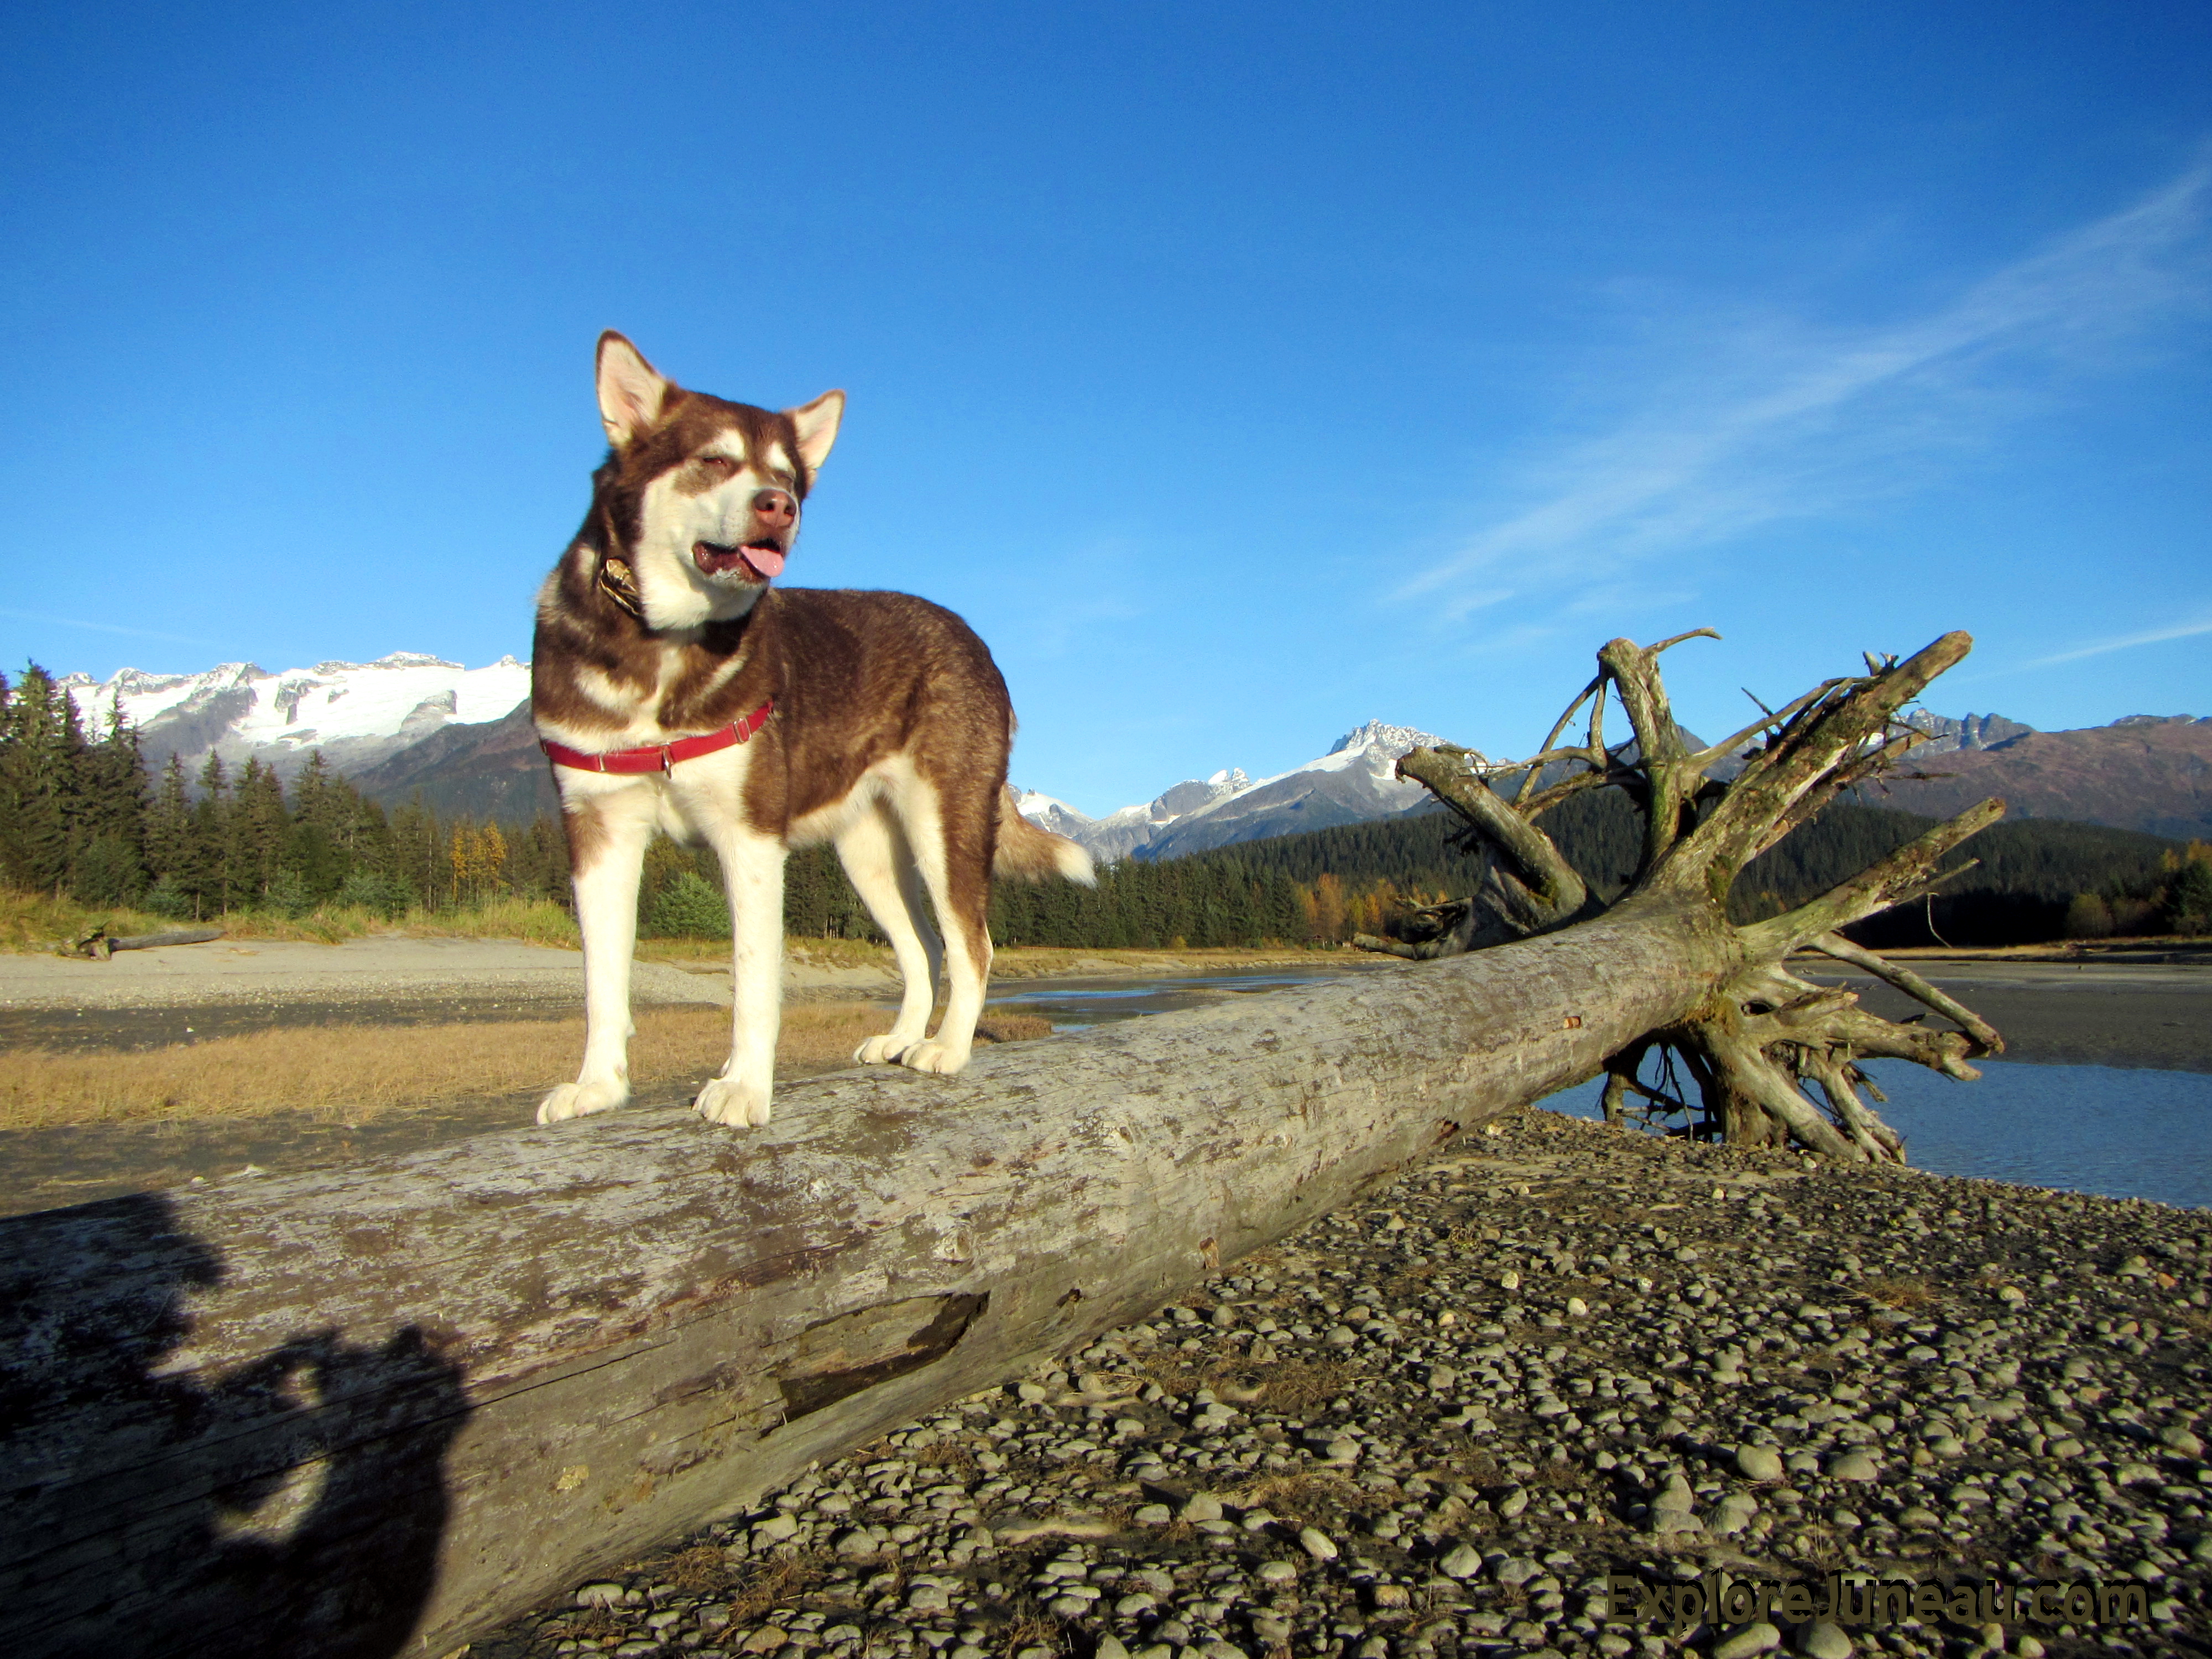 Freya - Eagle Beach Juneau Alaska 2015 Thank you for your Kindness and Support. Please click 